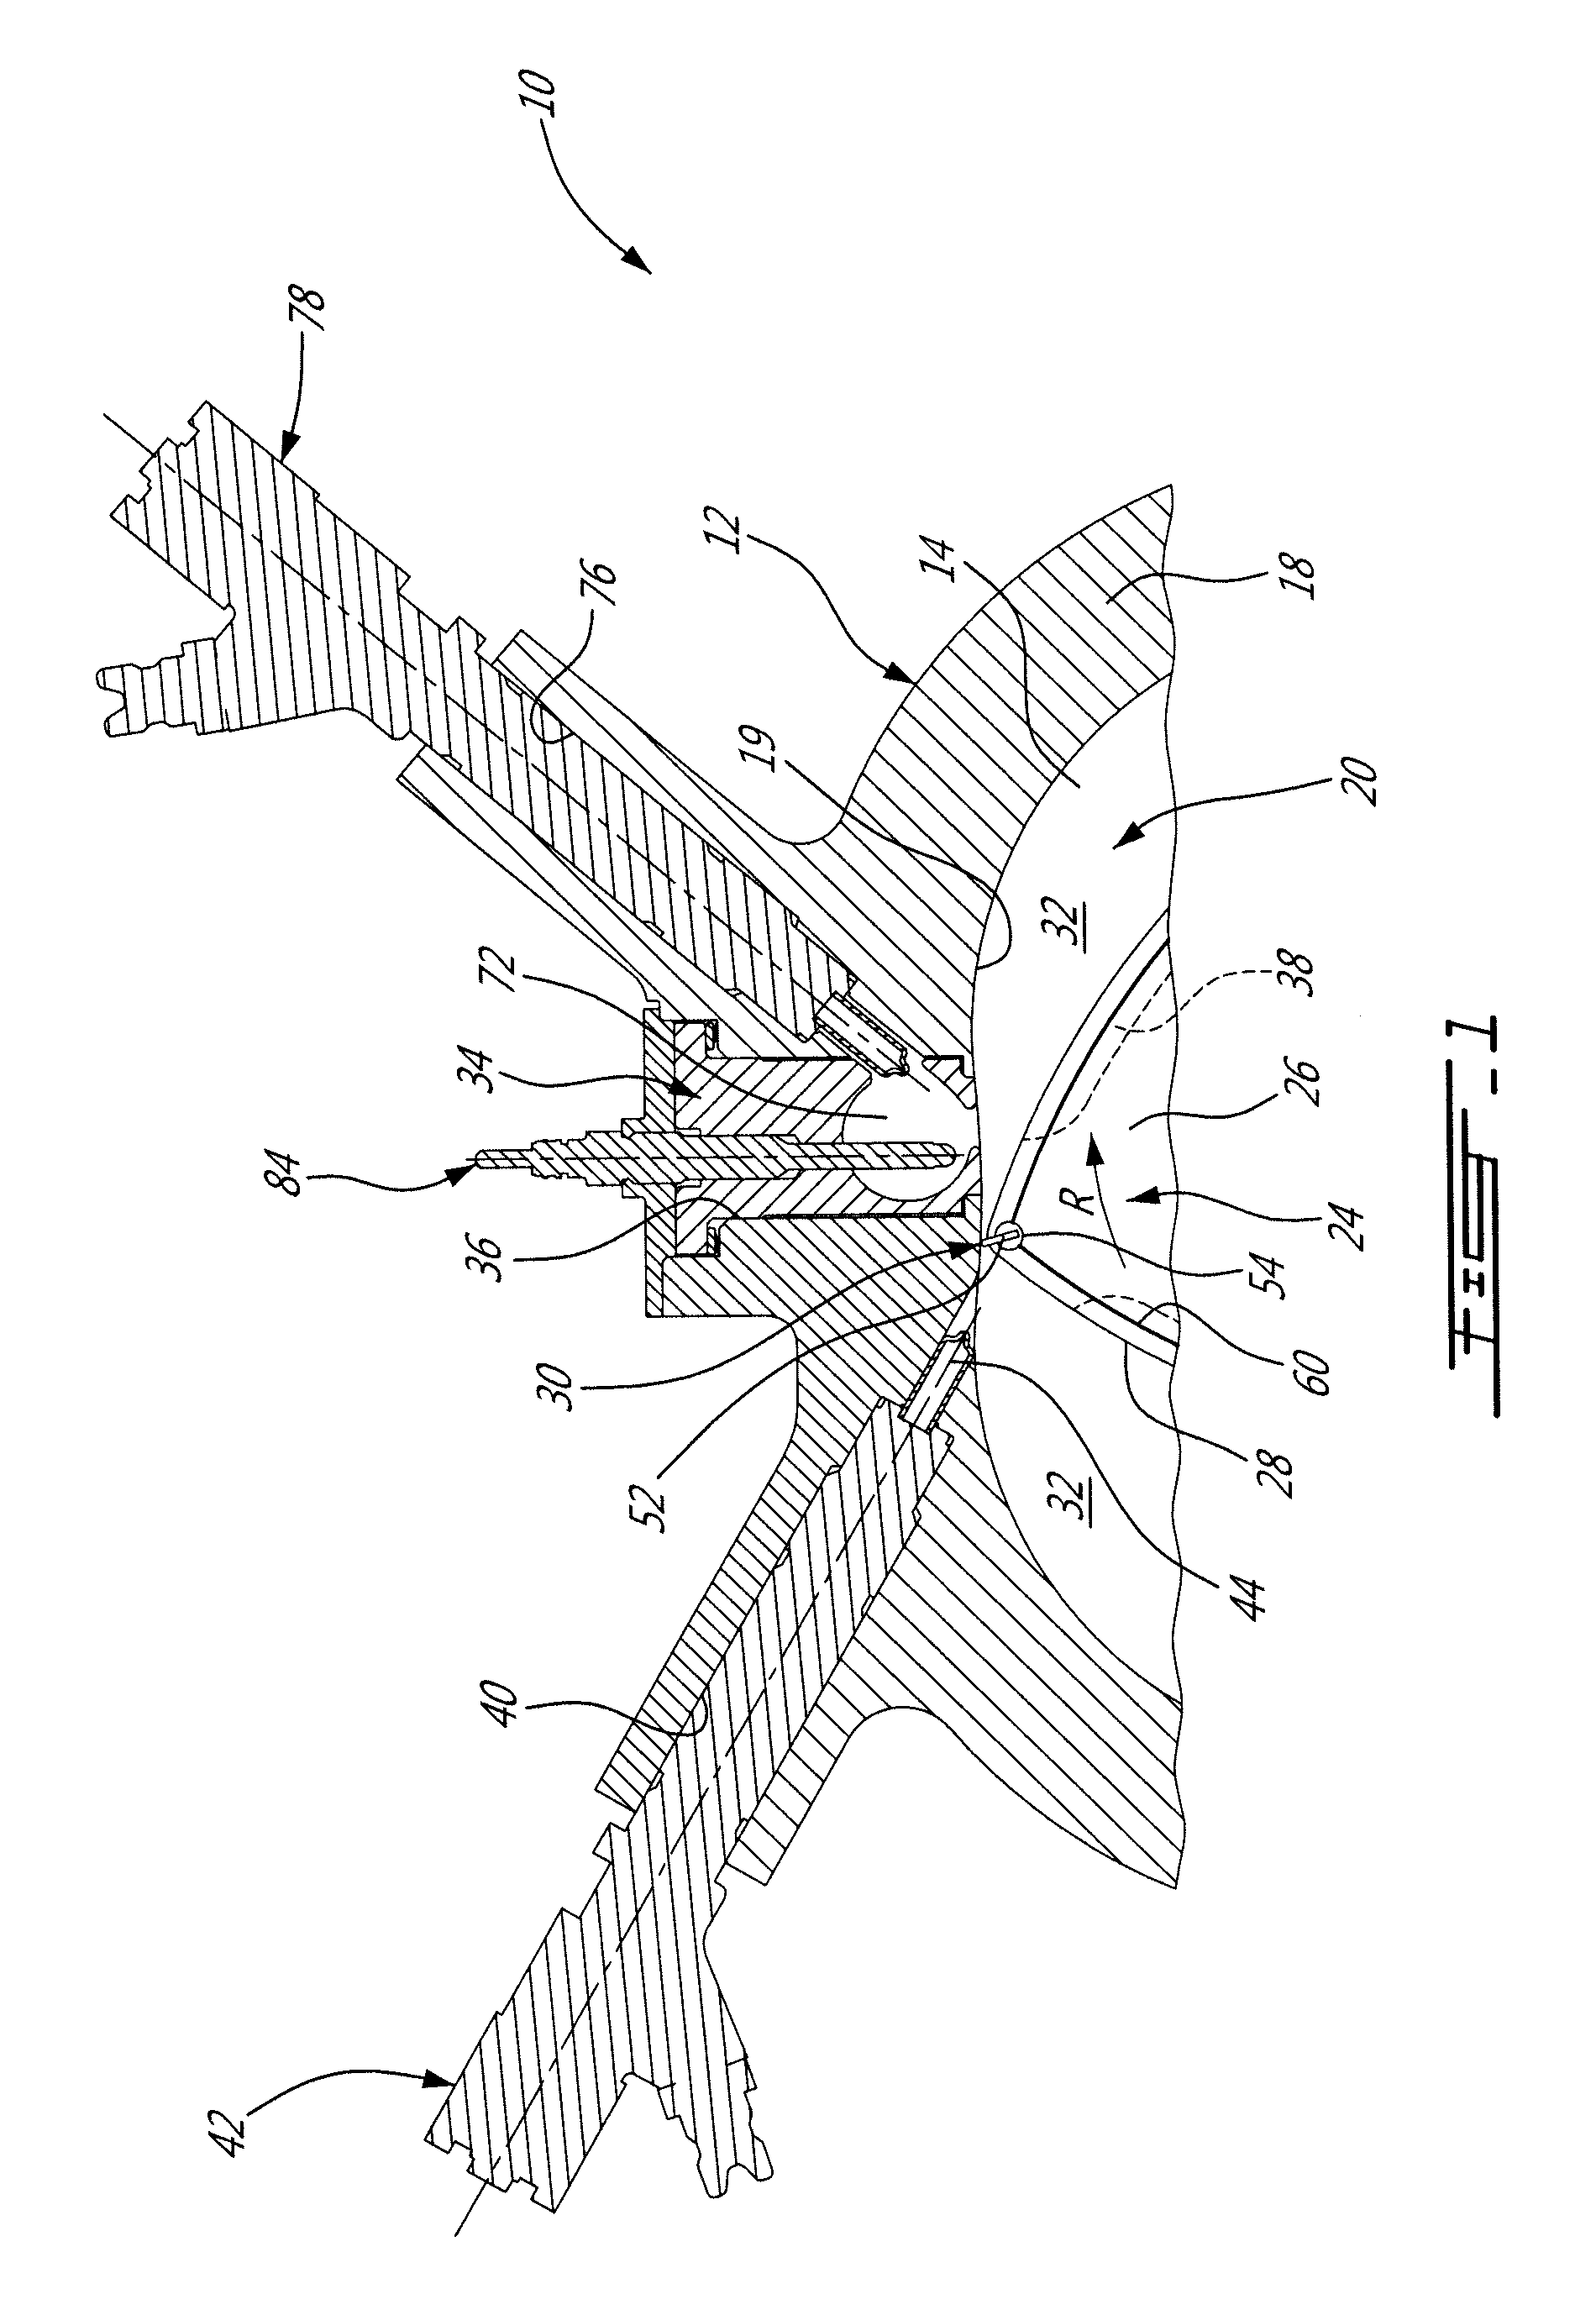 Rotary internal combustion engine with pilot subchamber